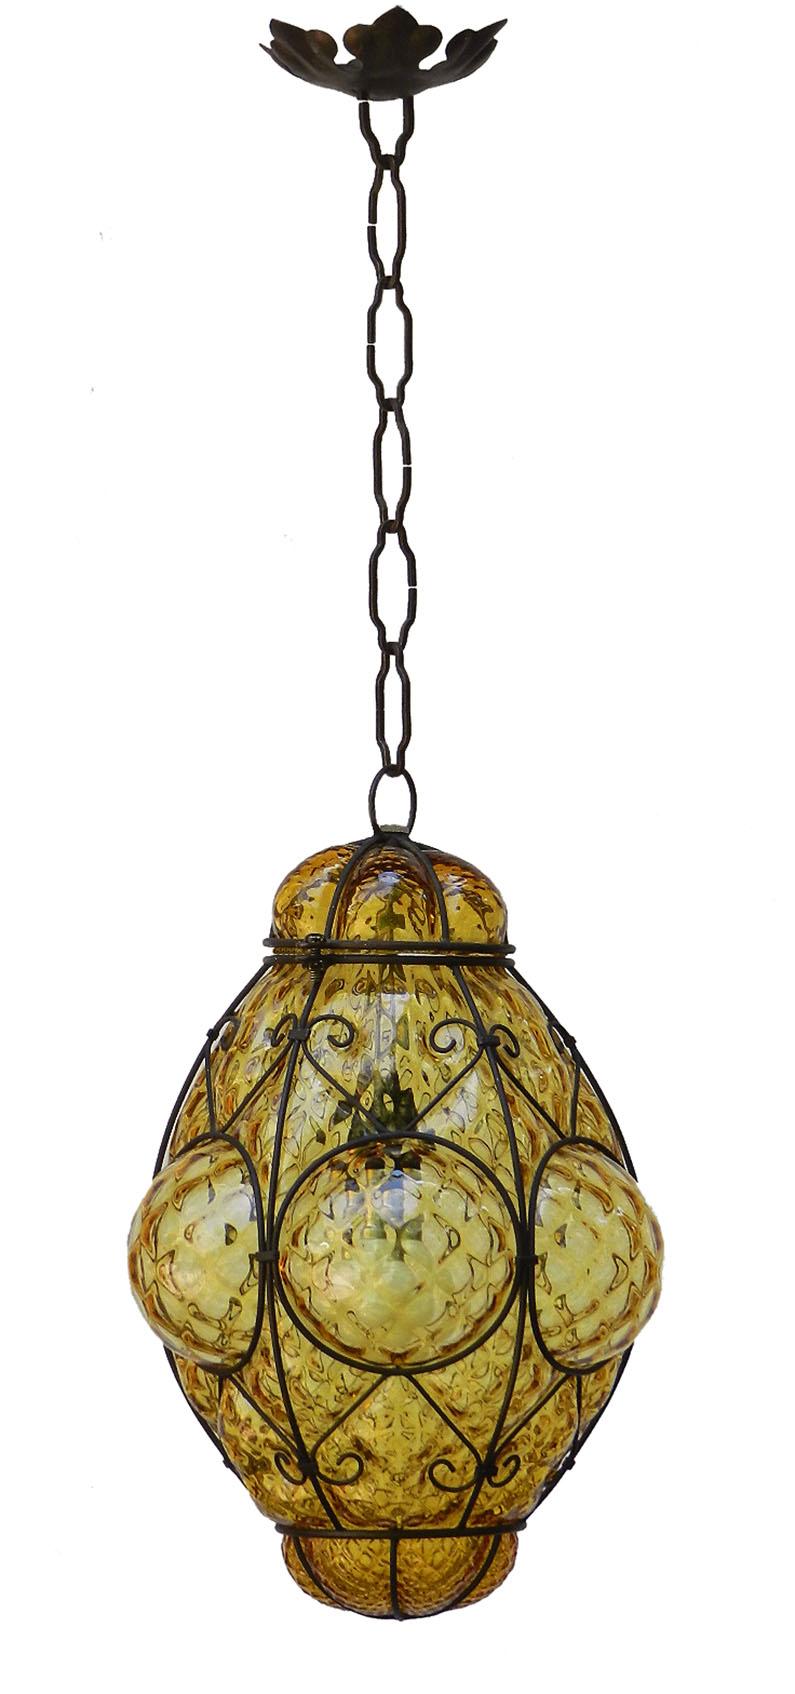 Seguso Murano pendant light Italian vintage handblown amber bubble glass midcentury
Manufactured by Seguso in the 1960s.
It is made from handblown amber colored glass with a black coloured metal cage.
Sometimes known as Ali Baba lights
The top